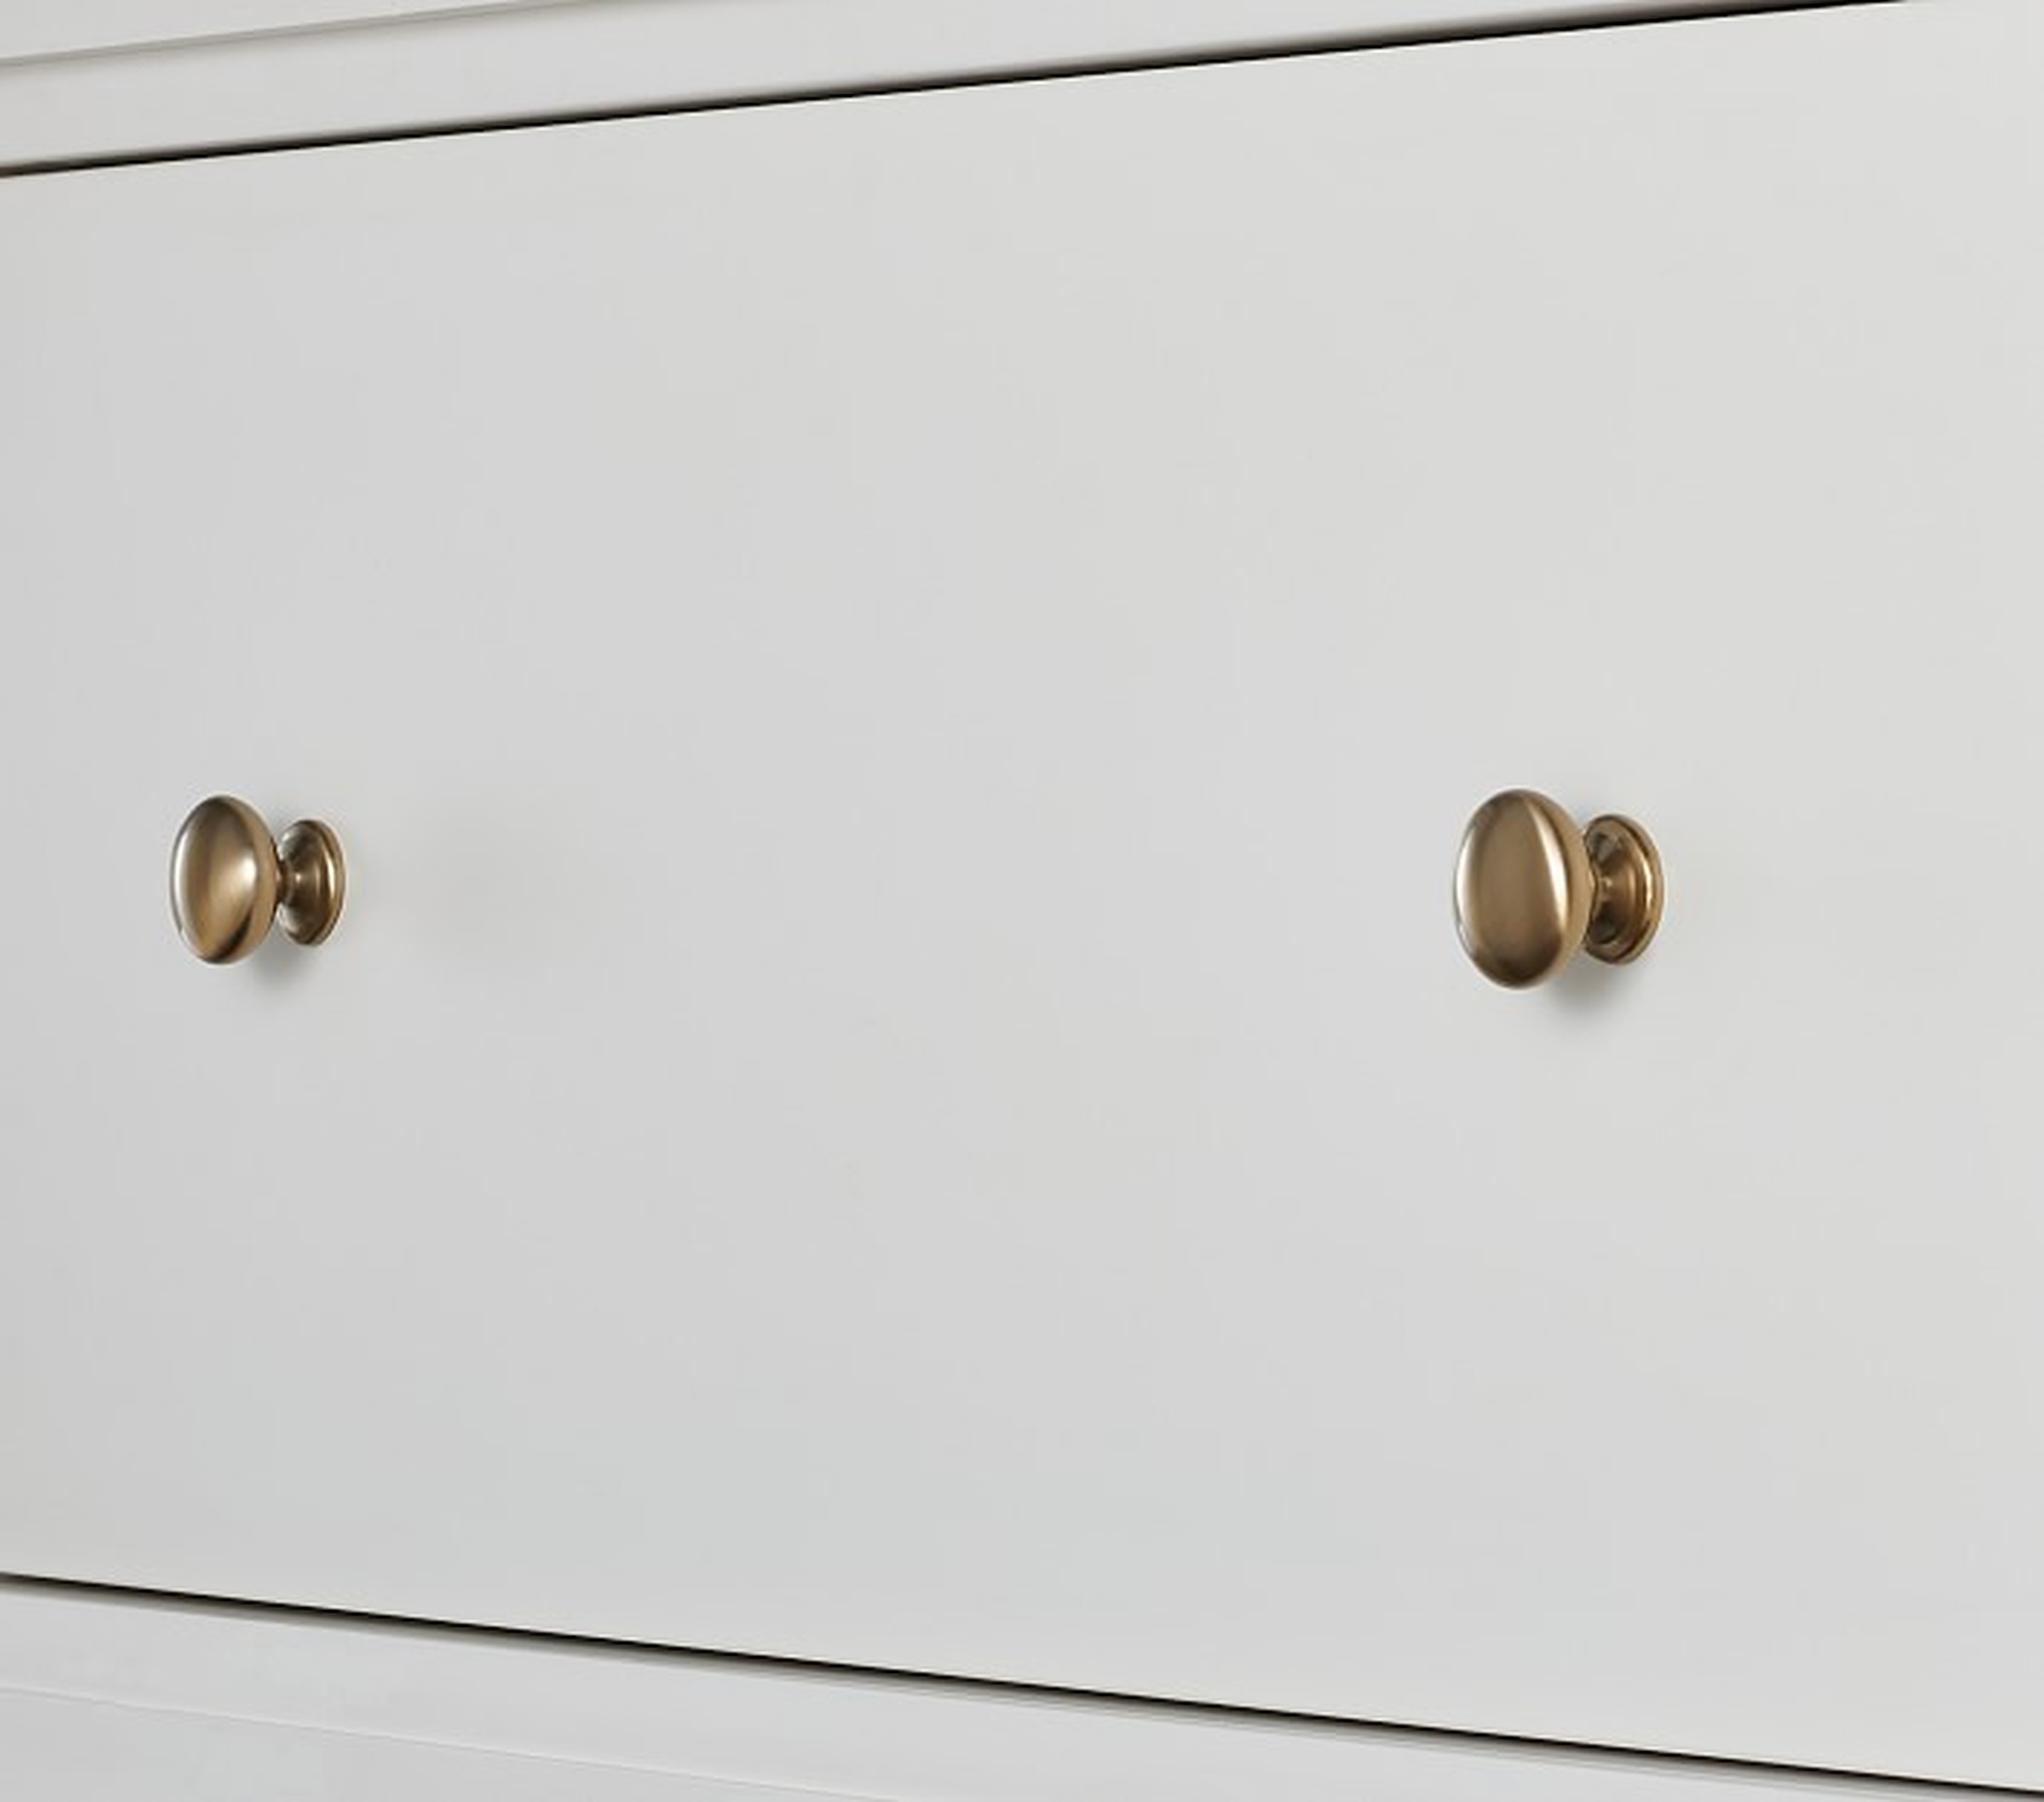 Cameron Wall System Traditional Cabinet Hardware, Brass, UPS - Pottery Barn